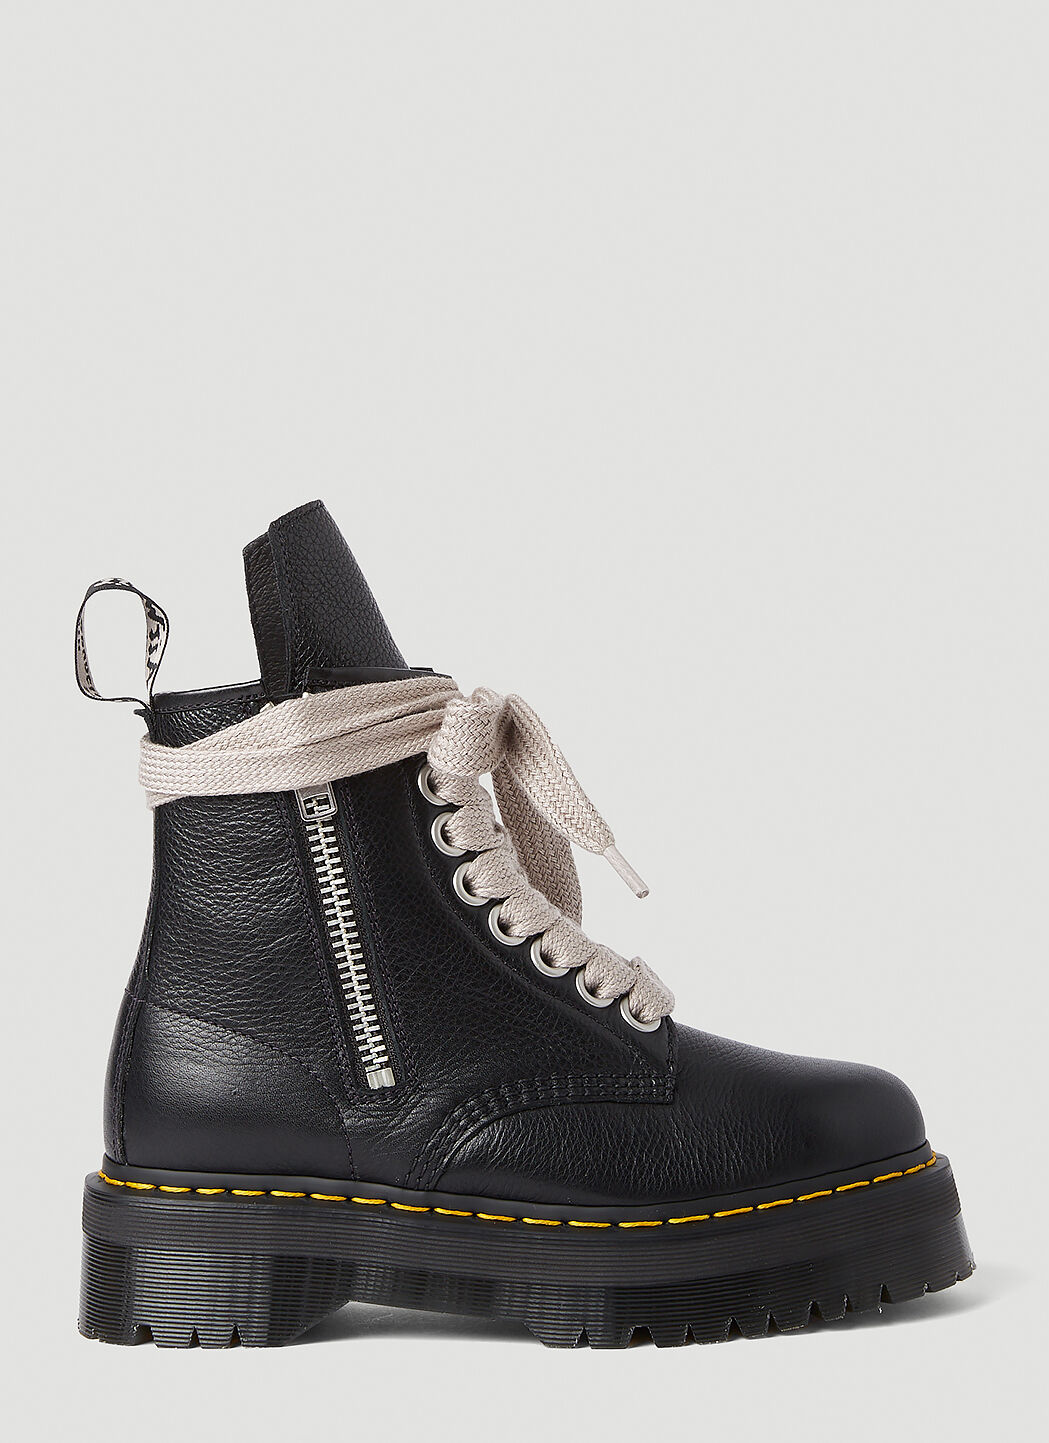 Rick Owens x Dr. Martens Jumbo Laced Boots 黑色 rod0156002